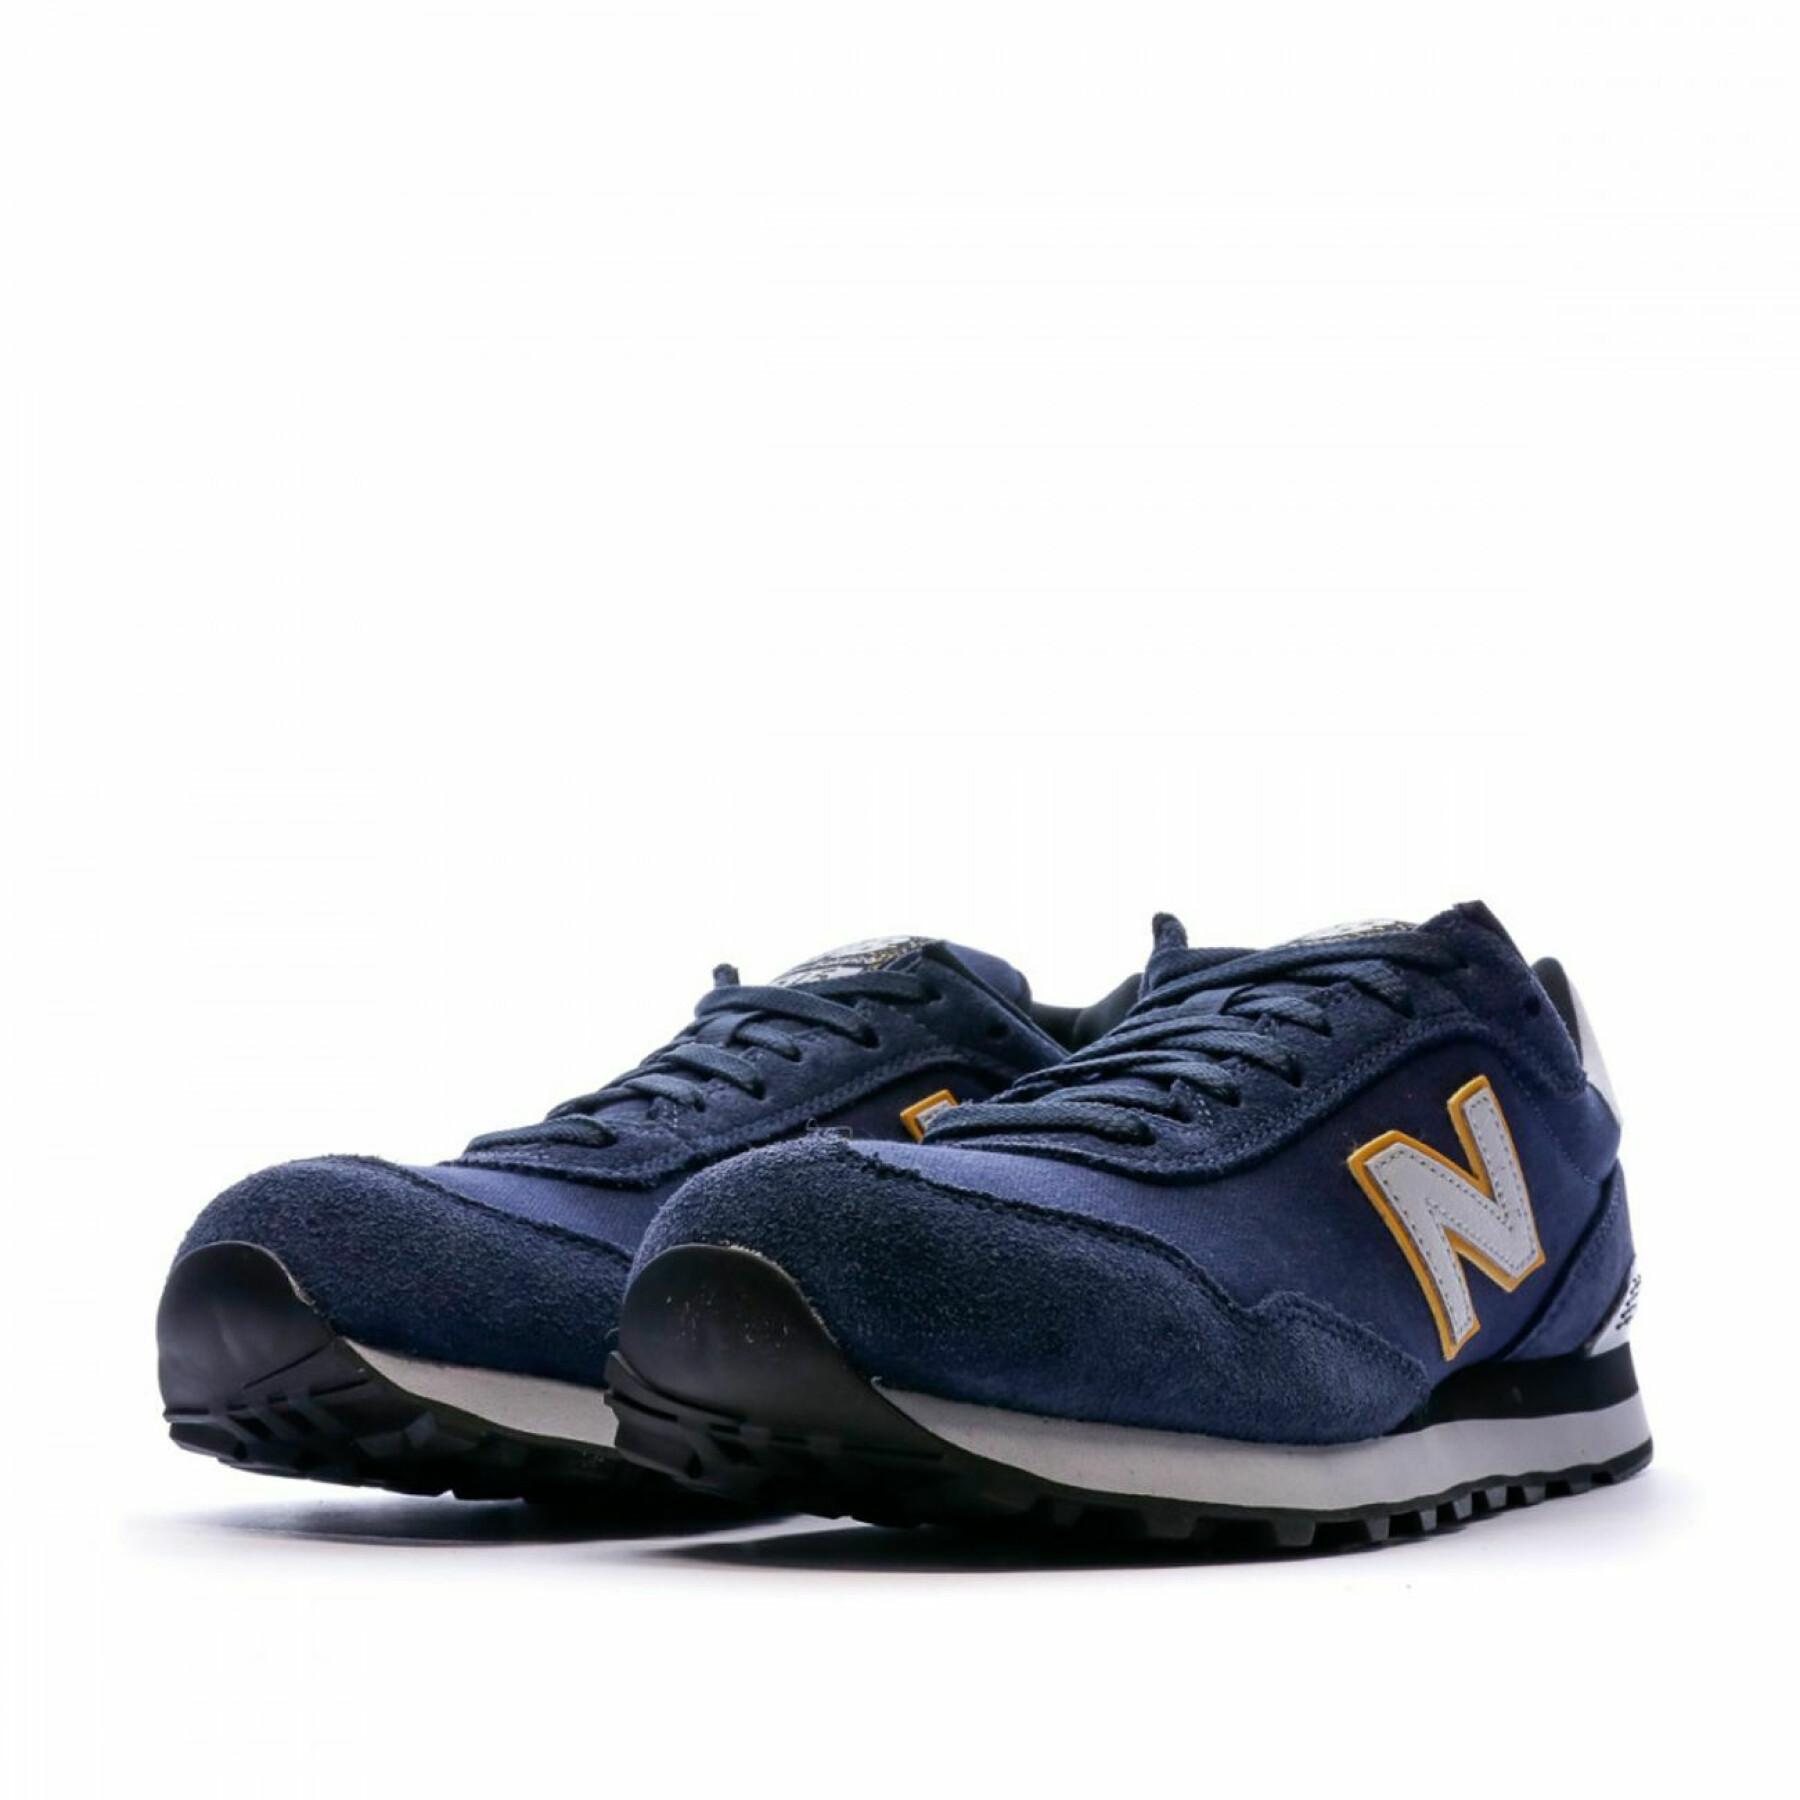 Formadores New Balance 515 classic